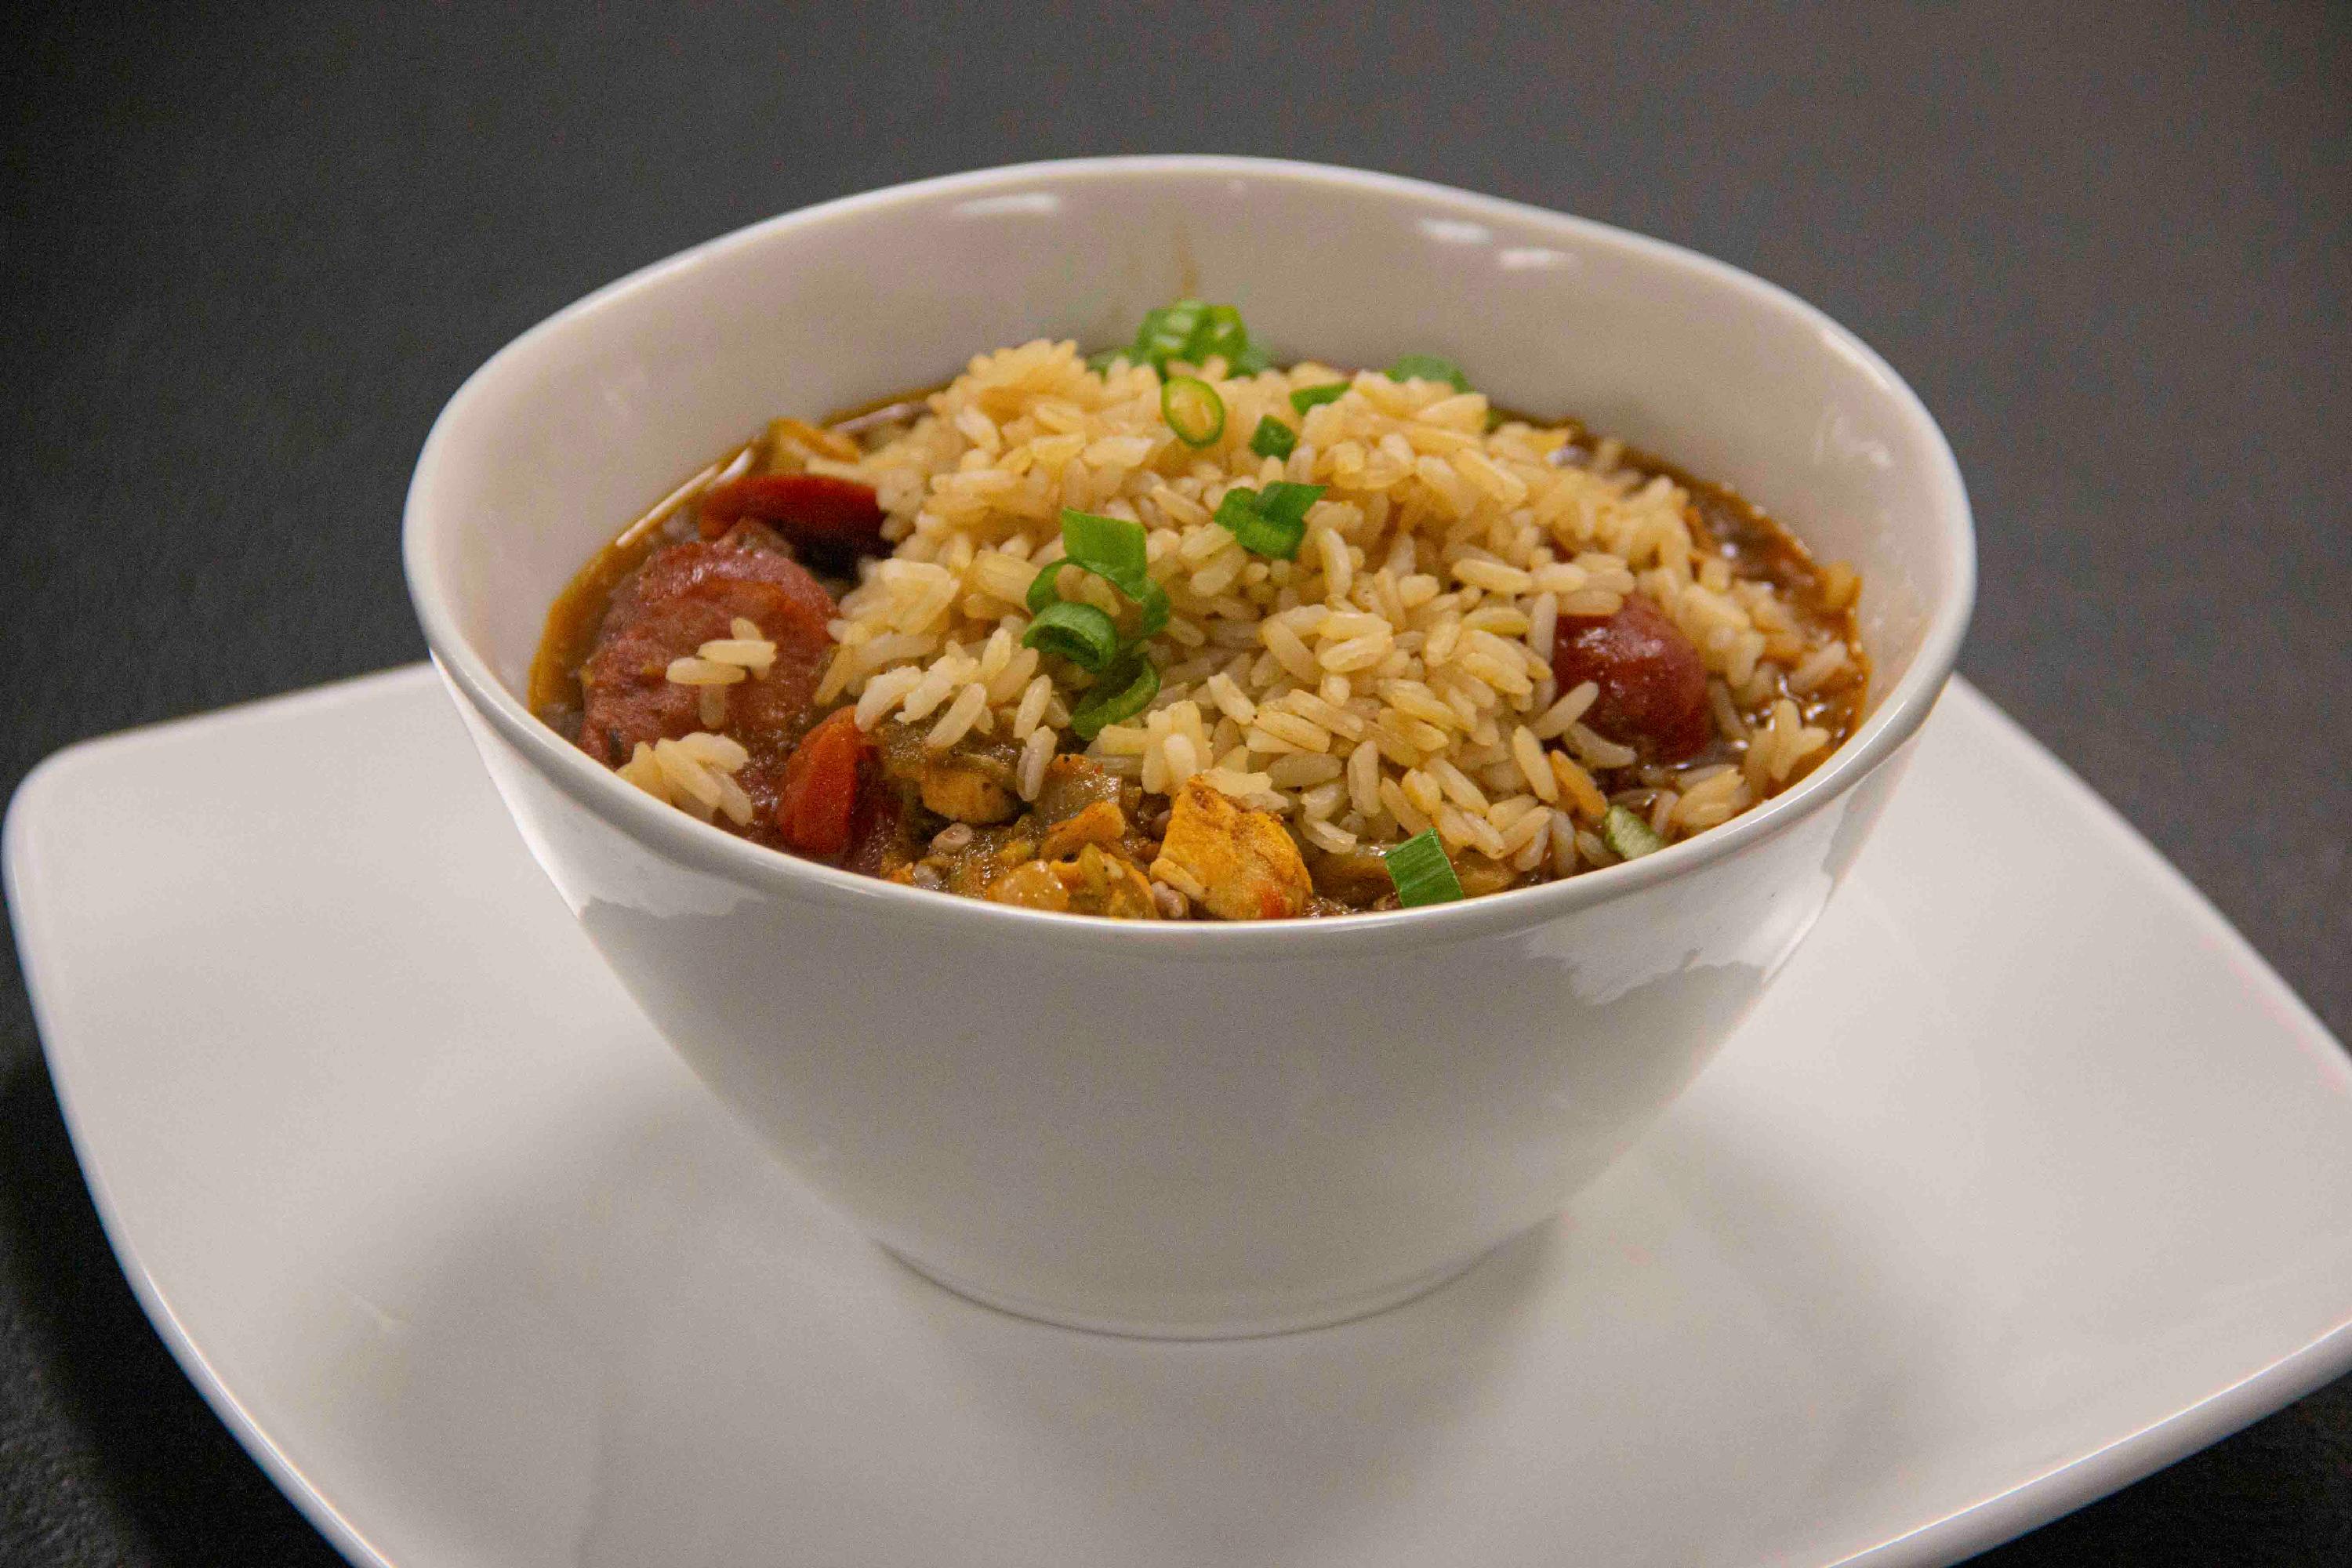 A bowl of gumbo rests on a dark table